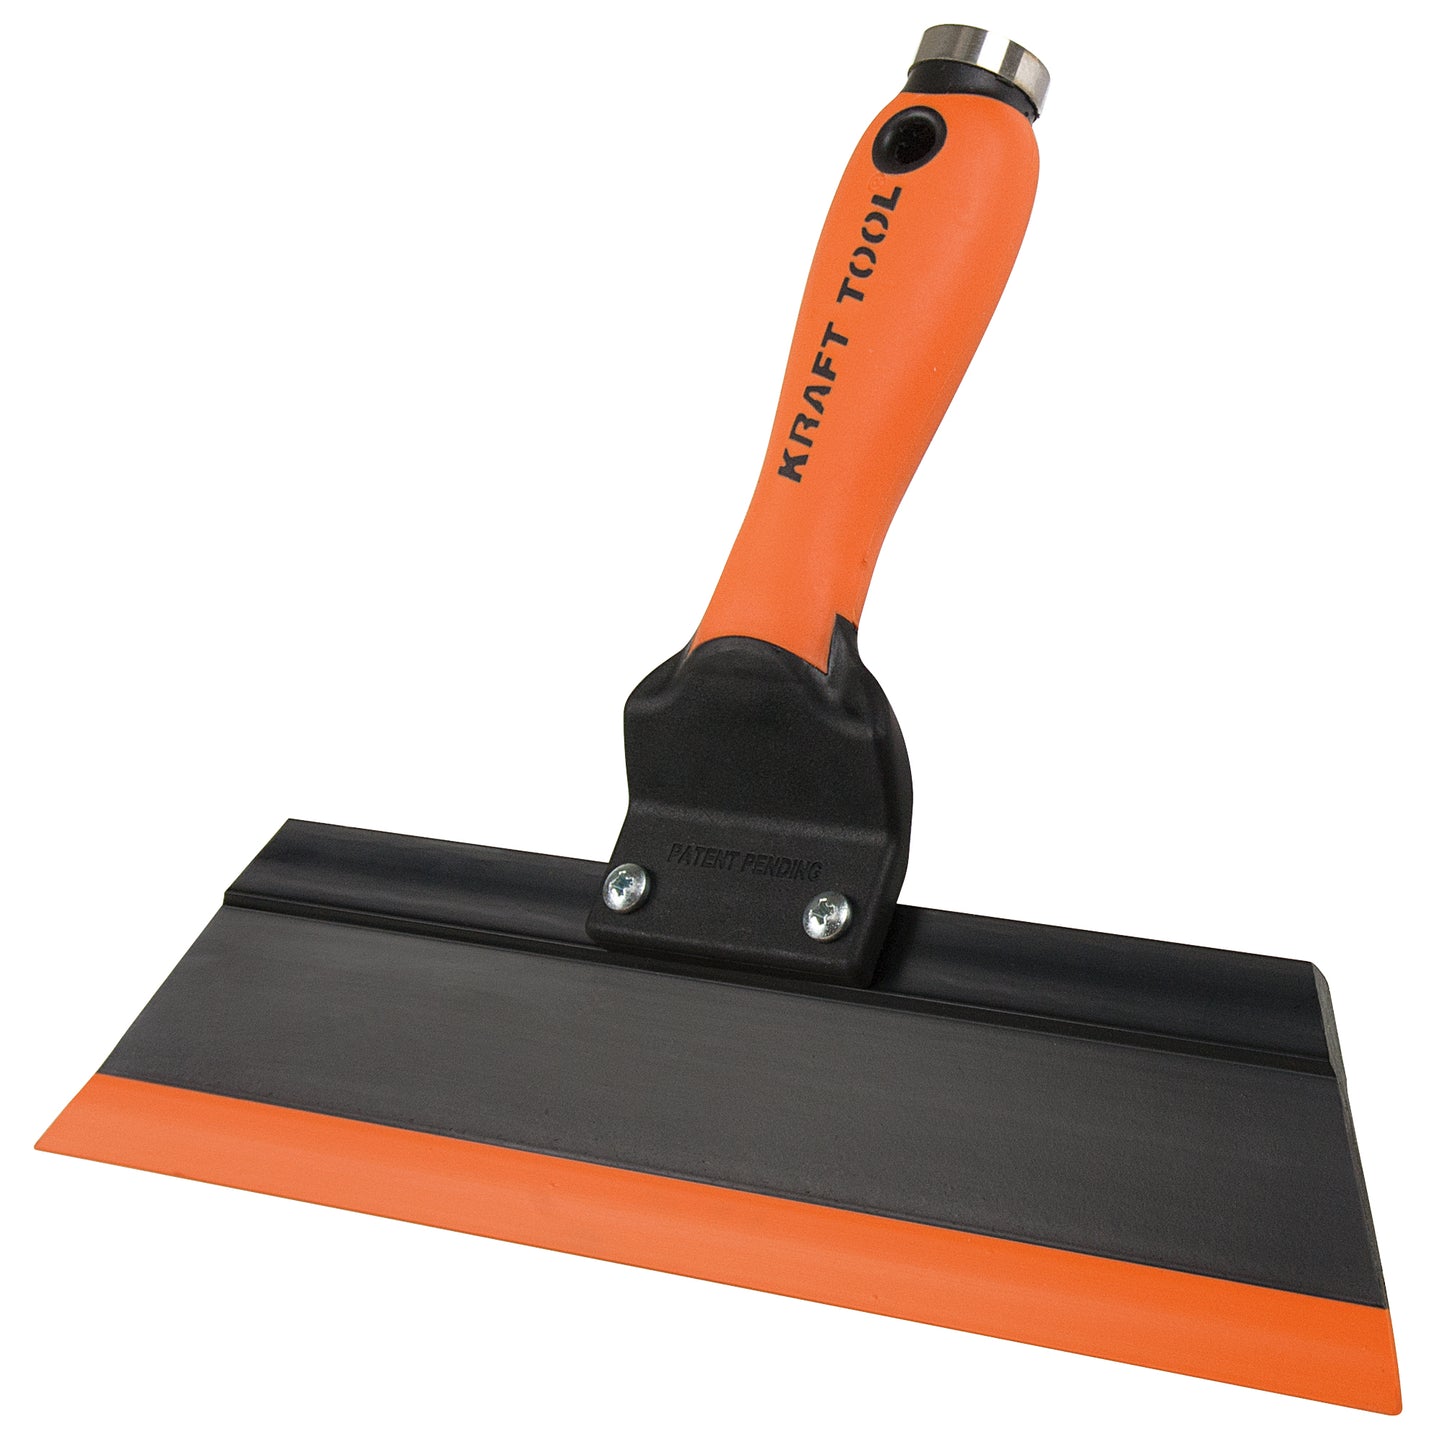 GG242 12" Squeegee Trowel with ProForm® Soft Grip Handle